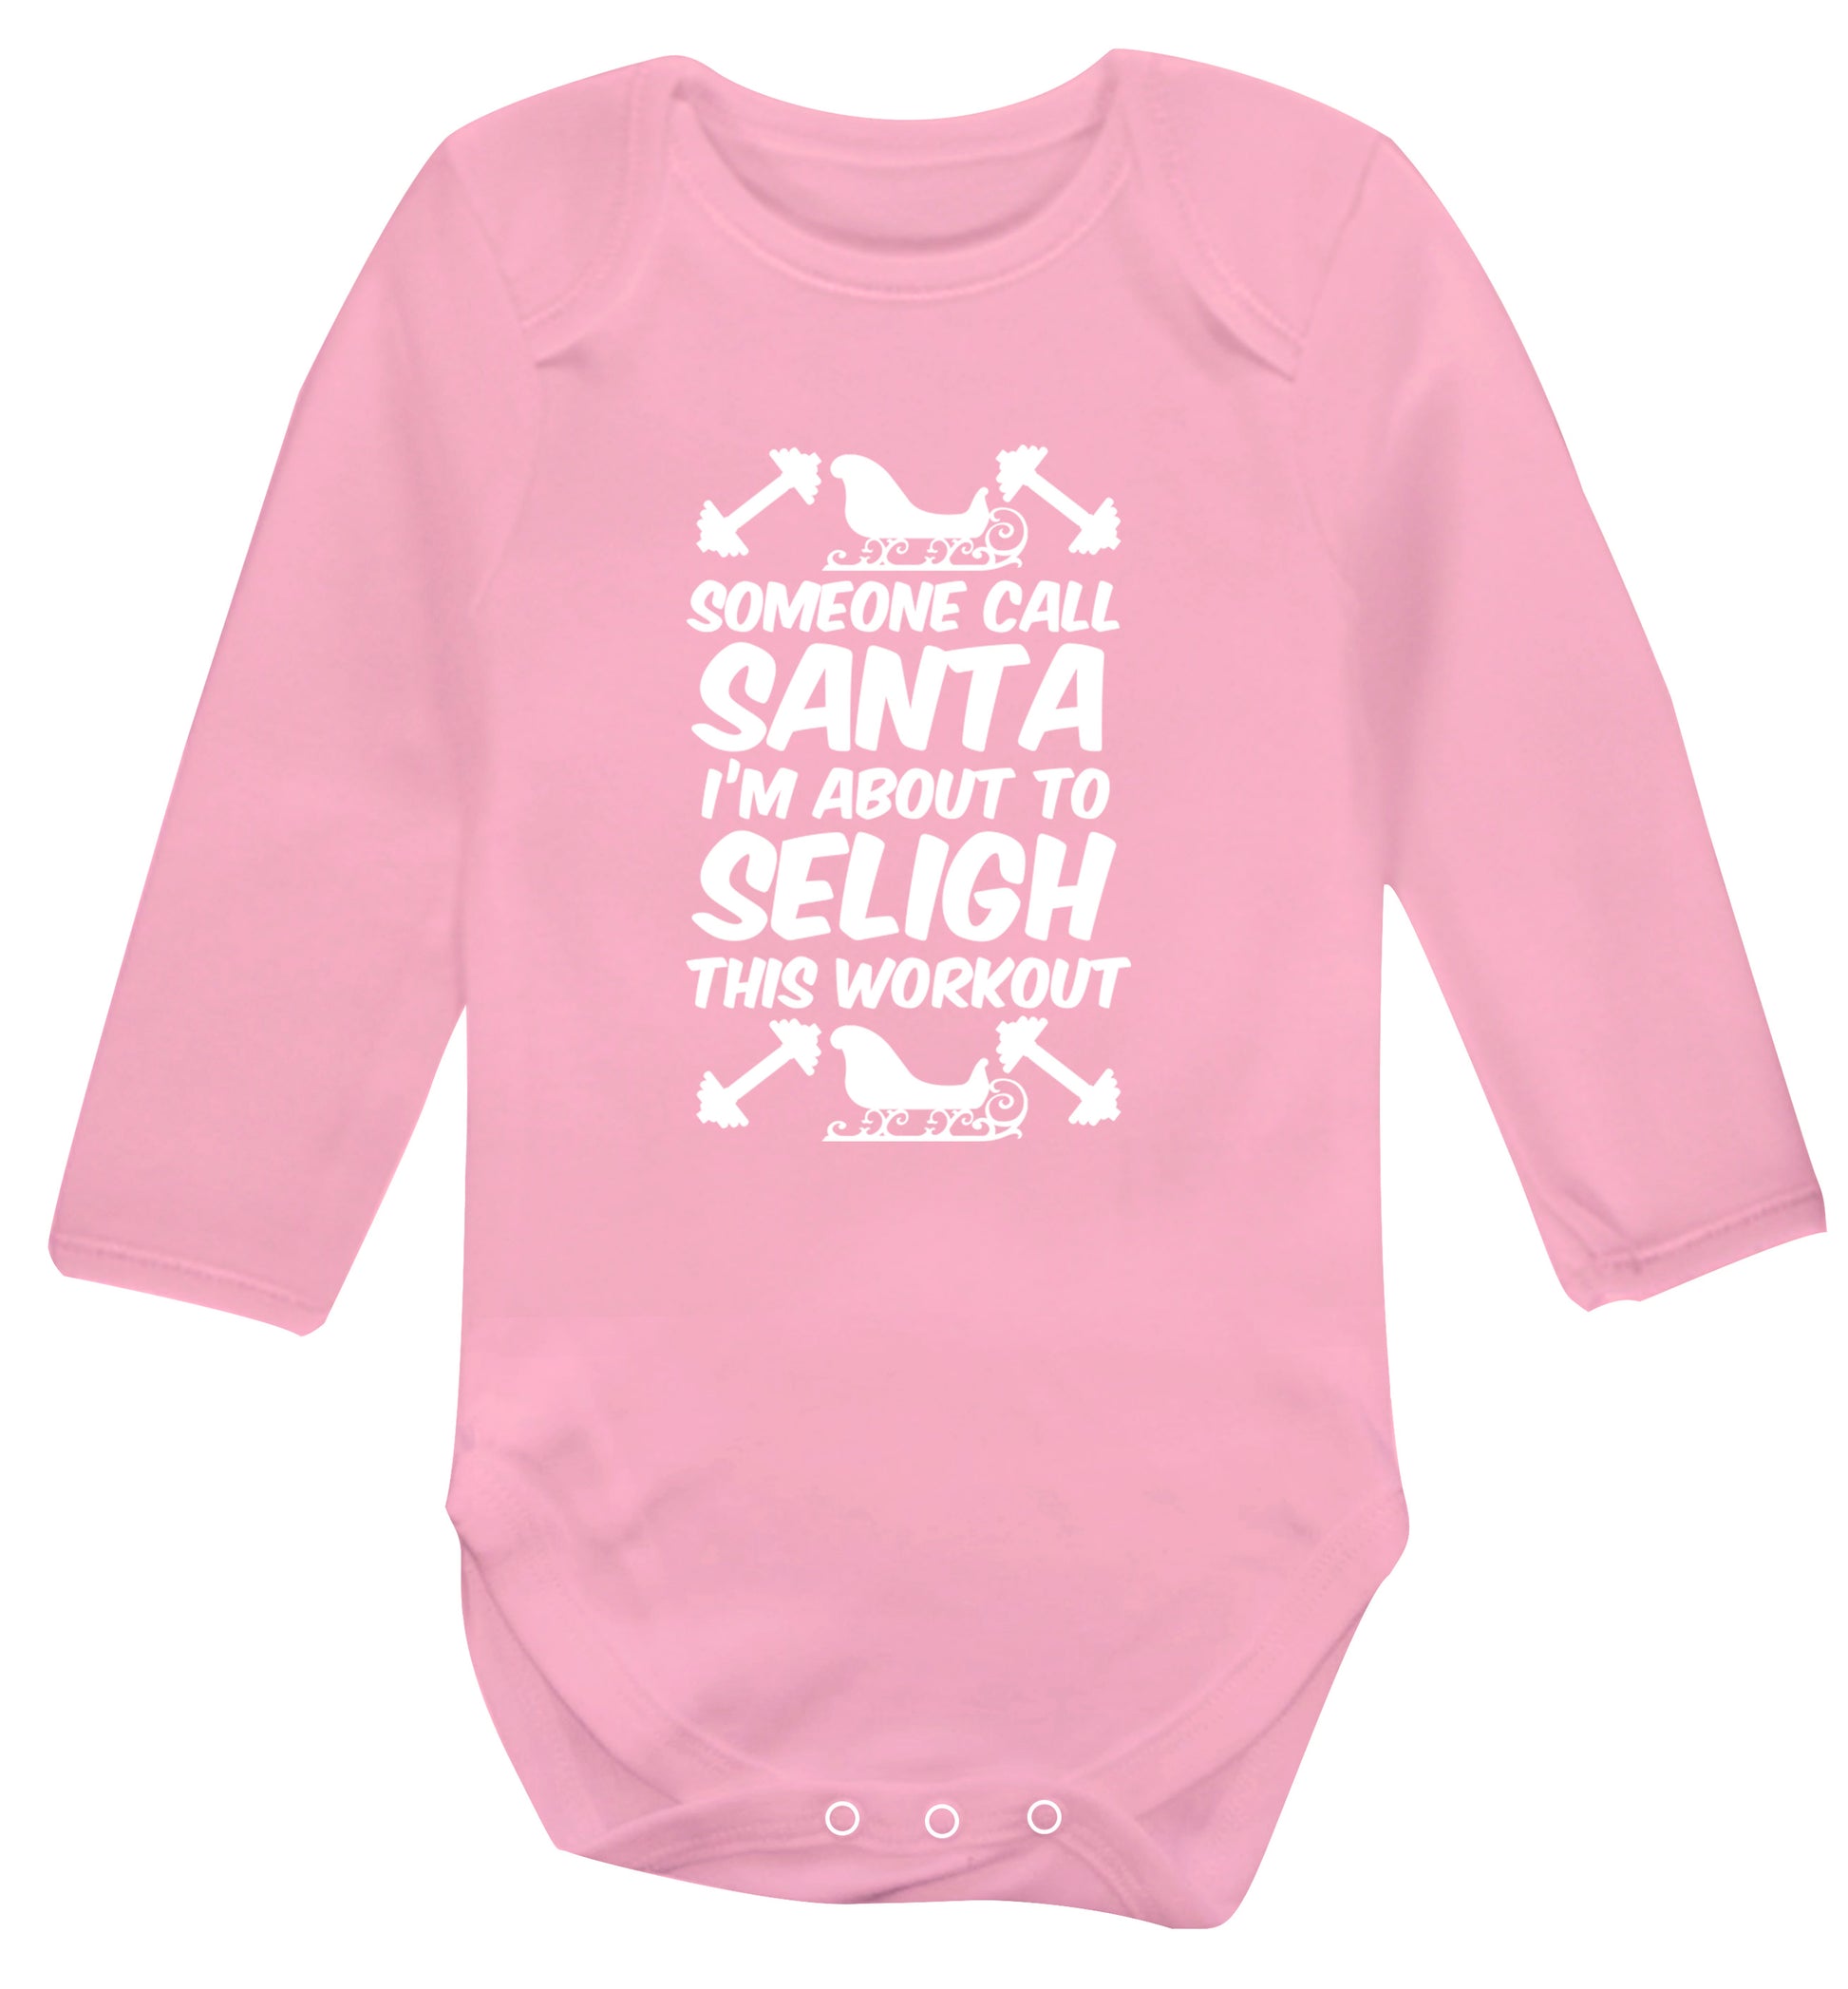 Someone call santa, I'm about to sleigh this workout Baby Vest long sleeved pale pink 6-12 months